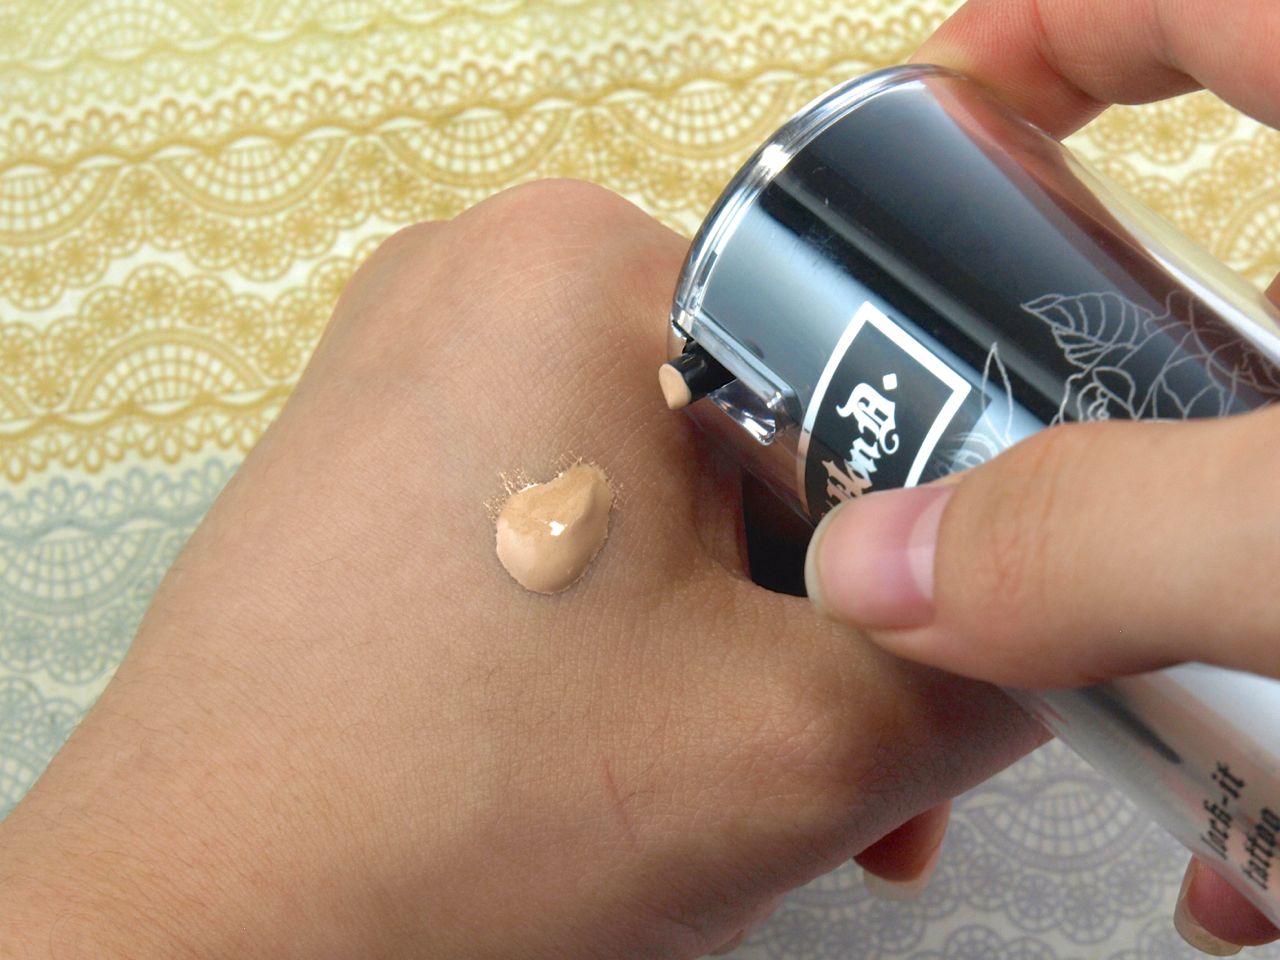 Kat Von D Lock-It Tattoo Foundation in "Light 45": Review and | Happy Sloths: Beauty, Makeup, and Skincare Blog with Reviews and Swatches